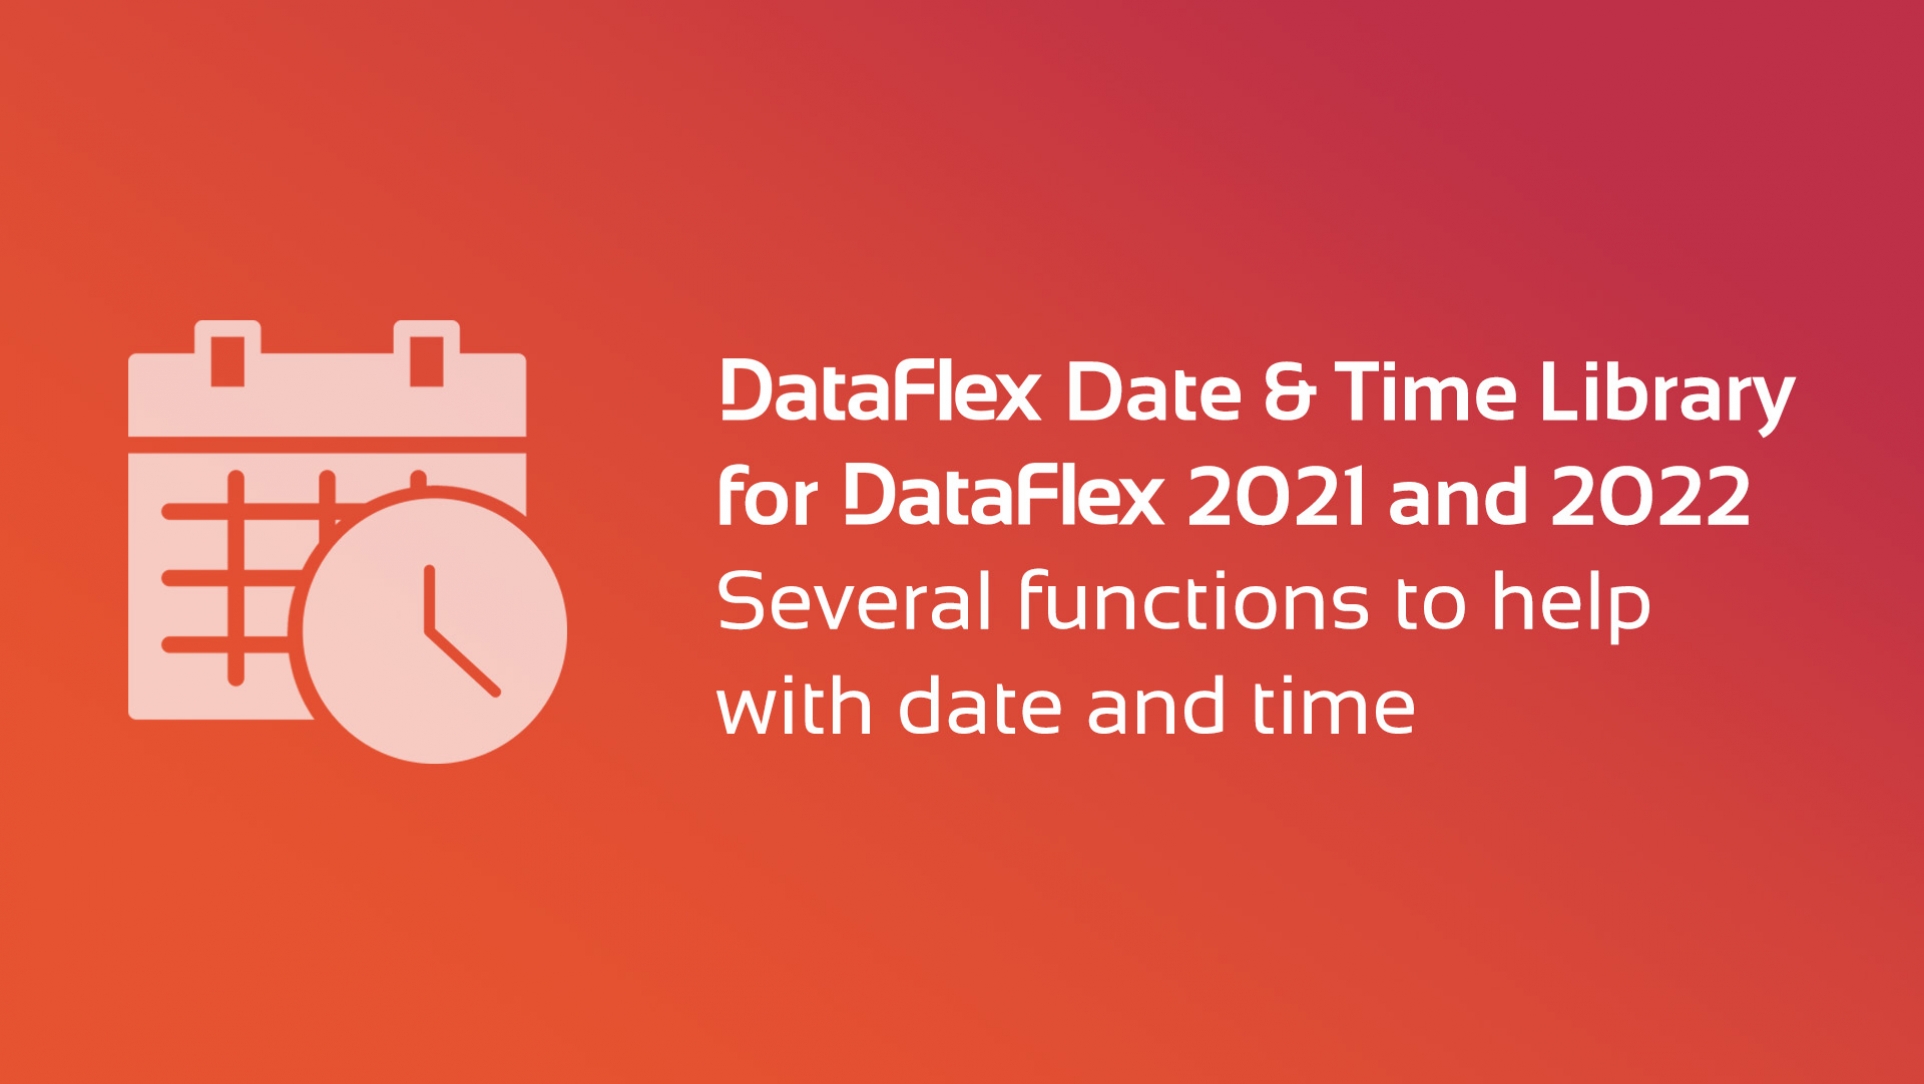 Free DataFlex Date & Time Library for DataFlex 2021 and 2022